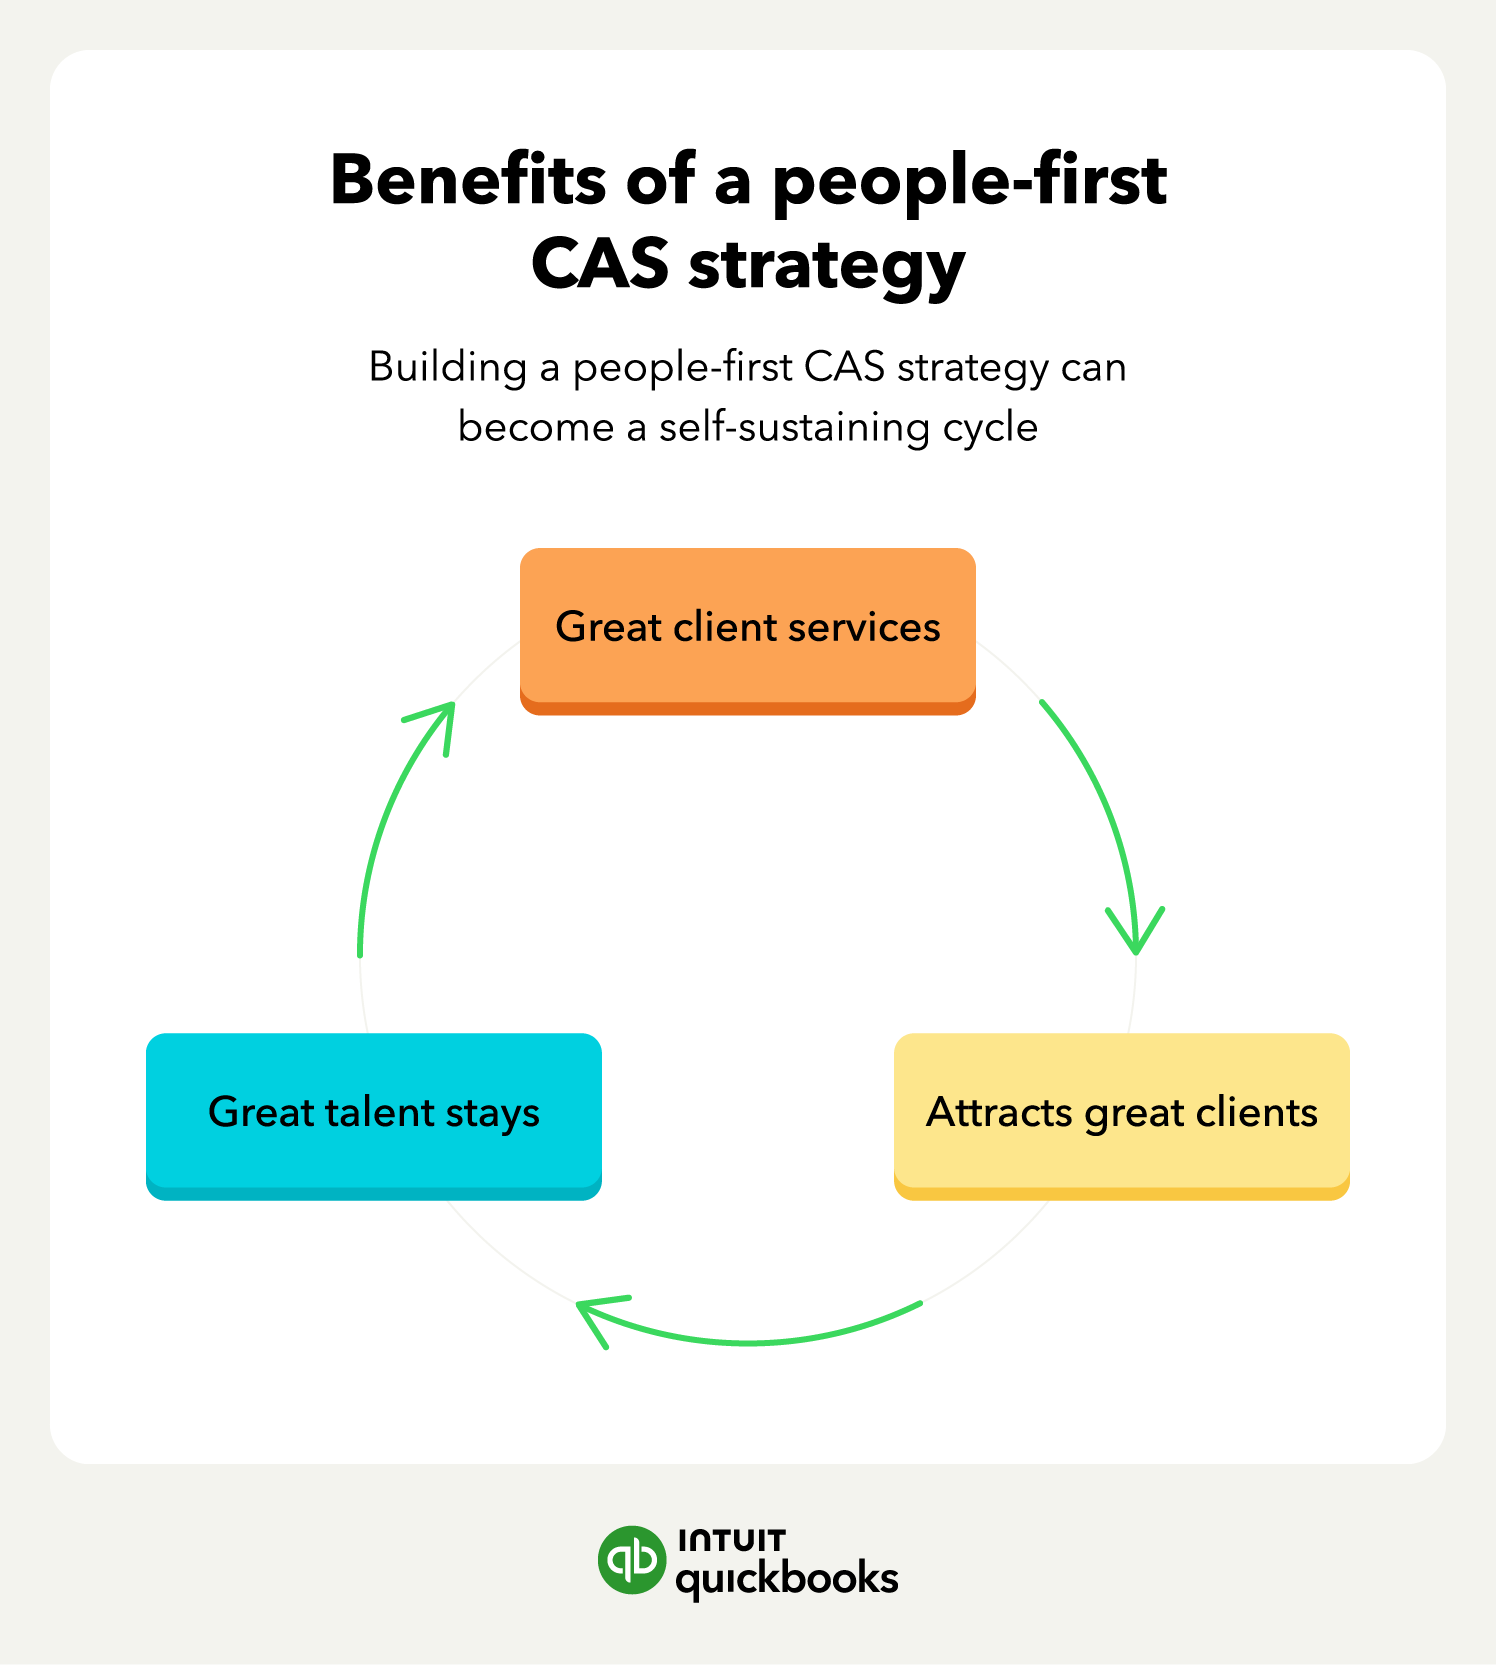 Building client advisory services? The future of CAS is people-first